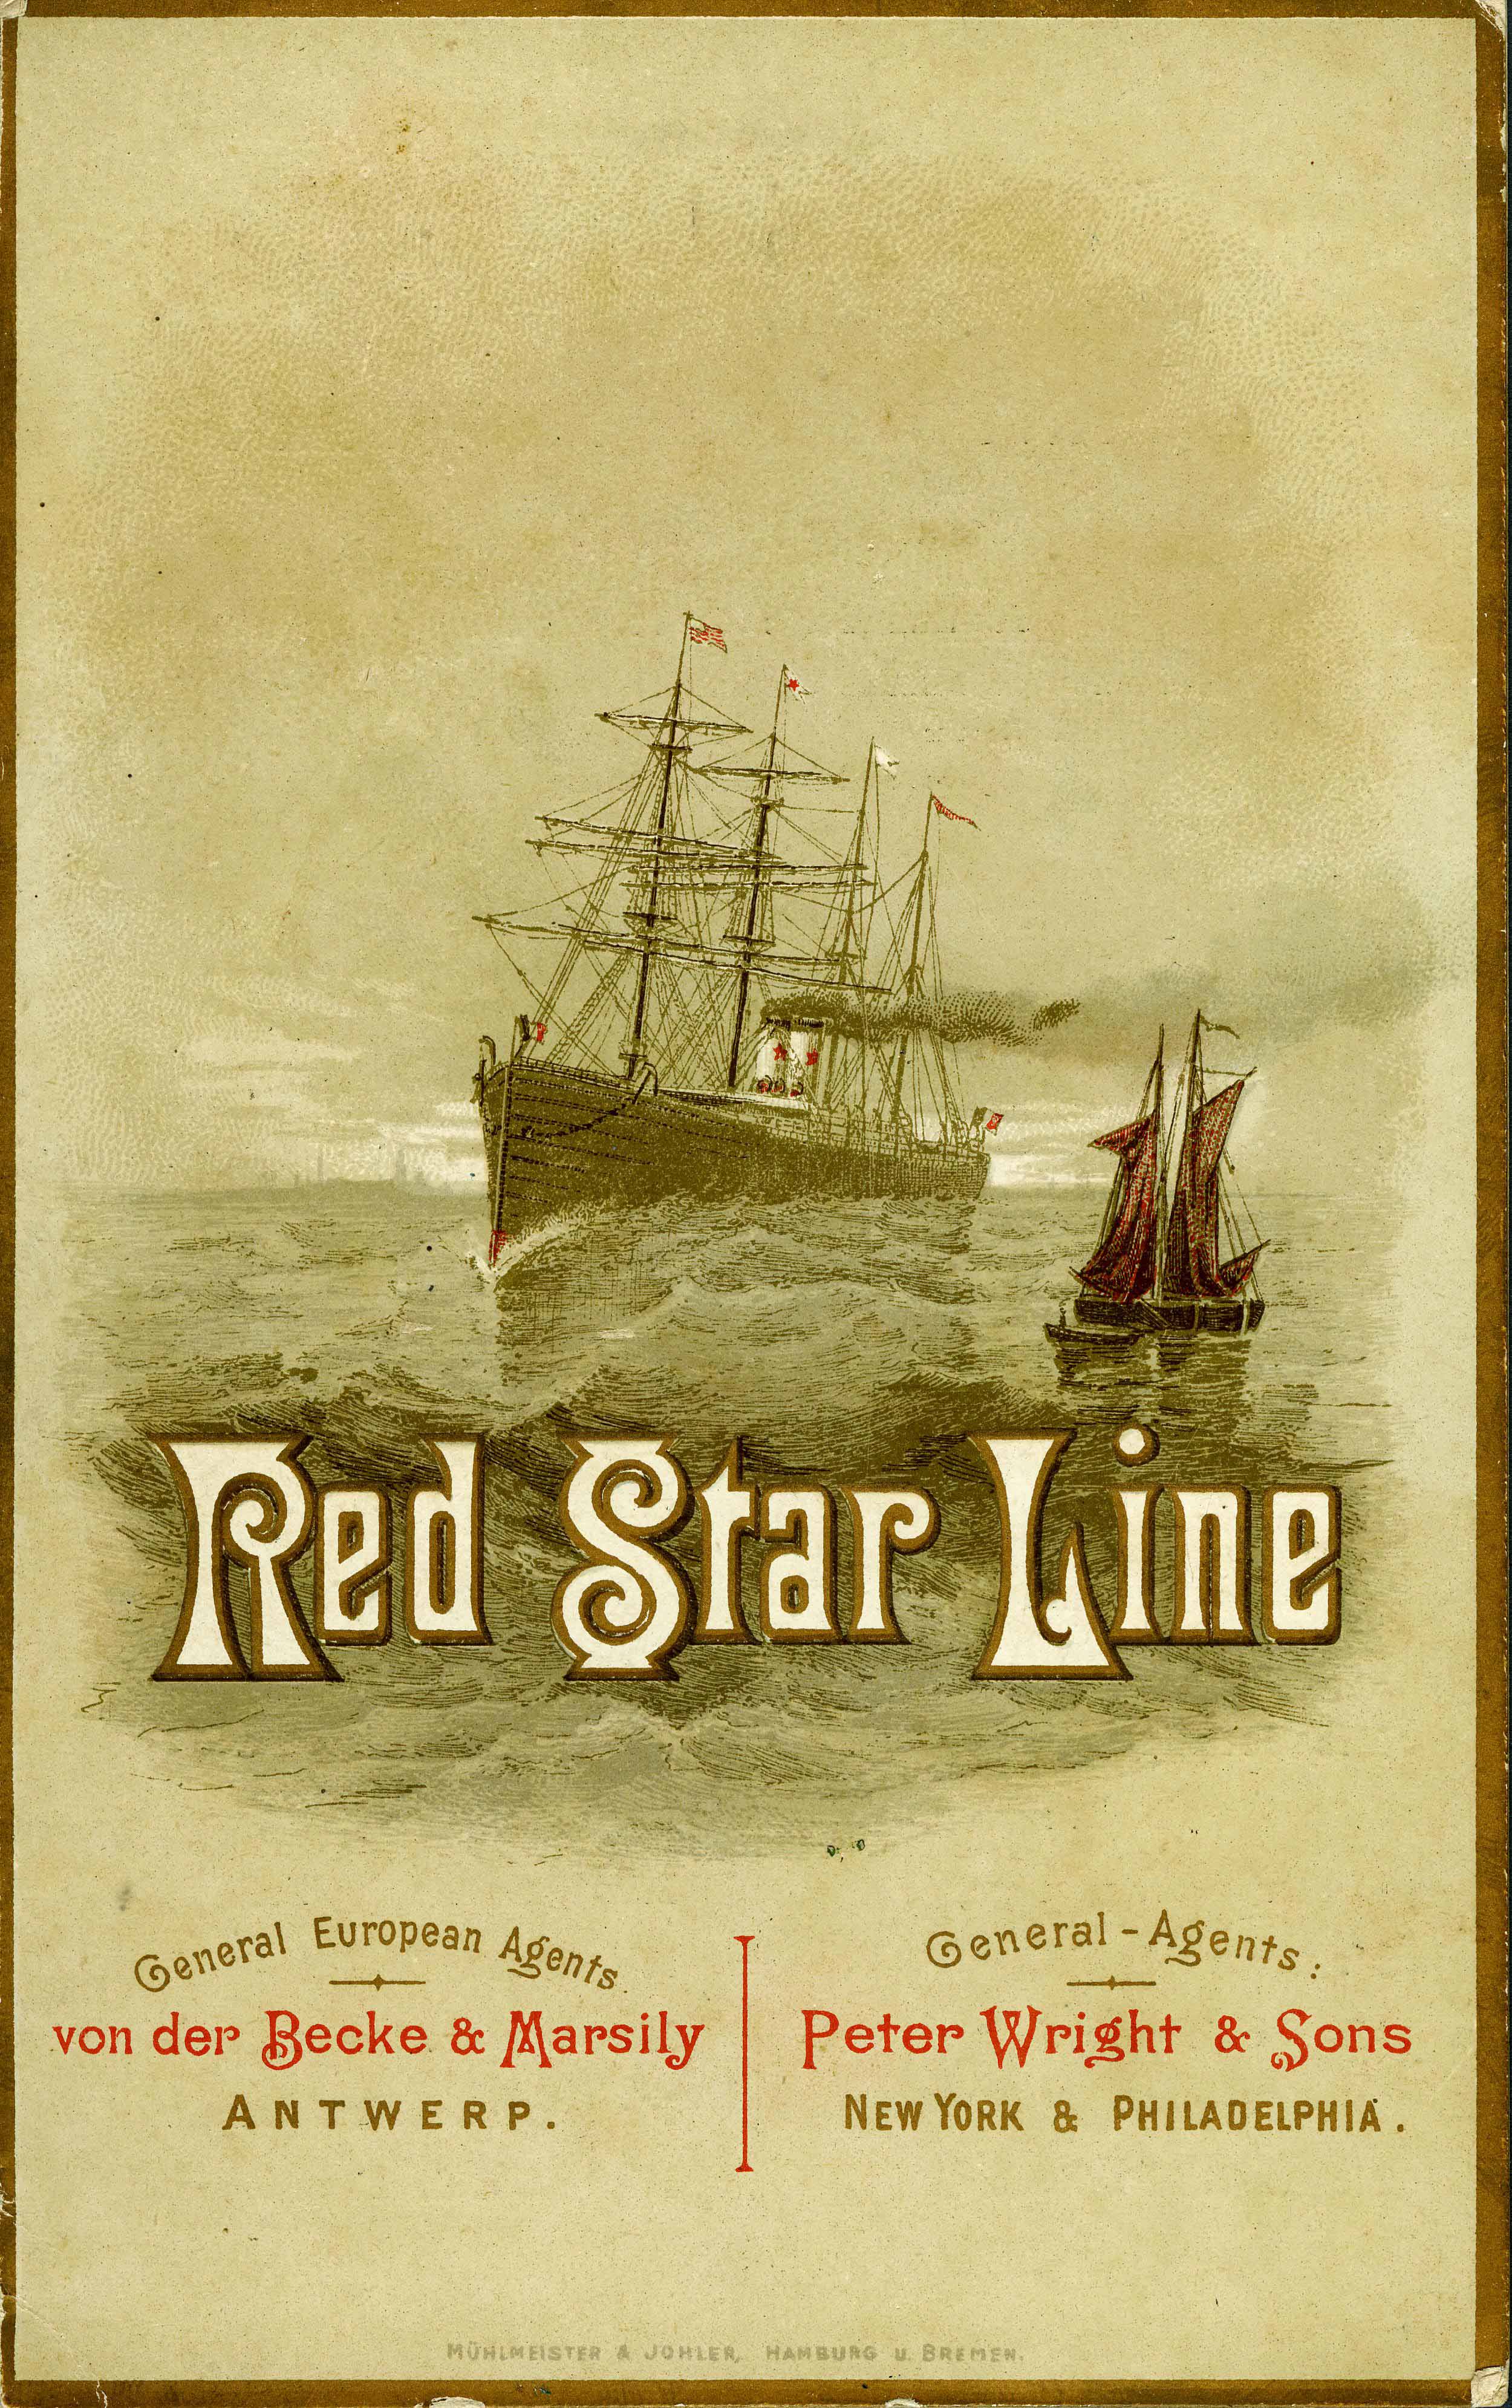 Red Star Line Cabin Passenger List for the Steamship S.S. Waesland from Antwerp to New York. Copyright Red Star Line Museum, Antwerp